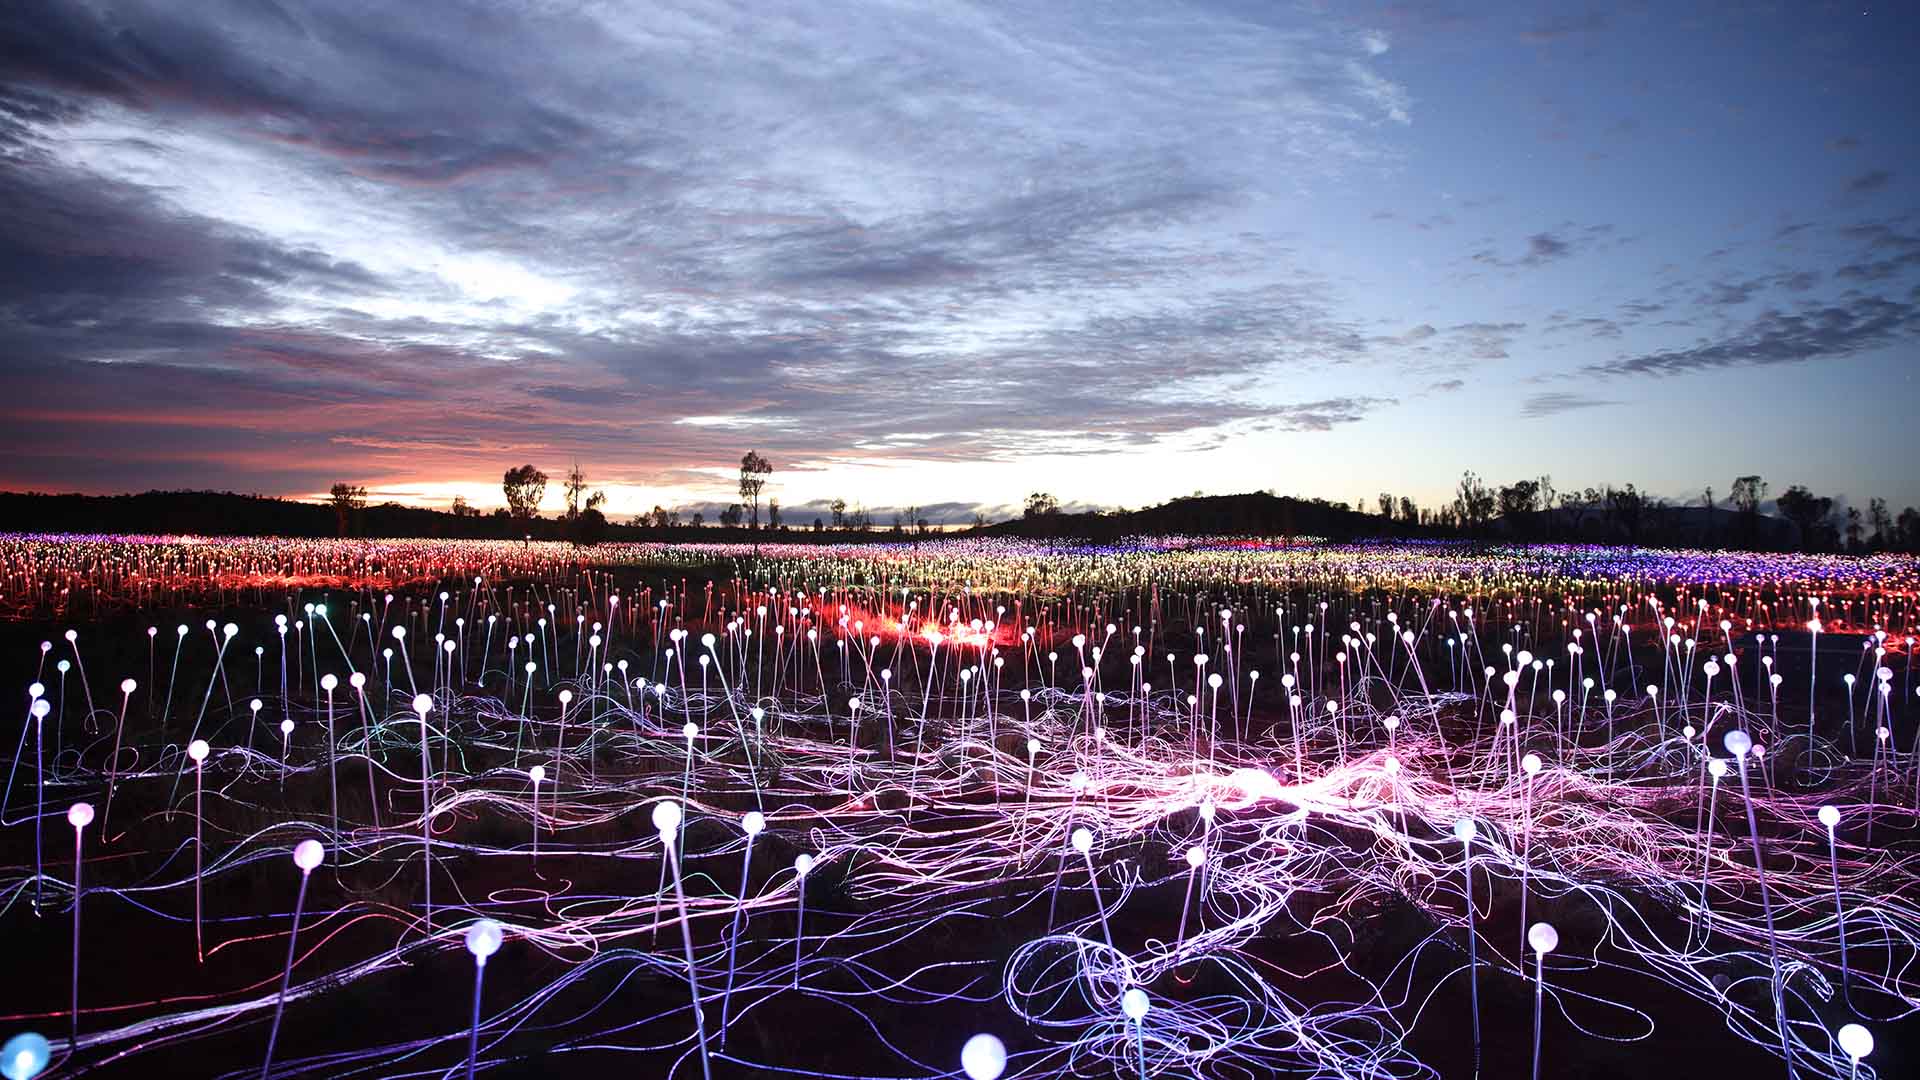 A Weekender's Guide to the Red Centre During Field of Light